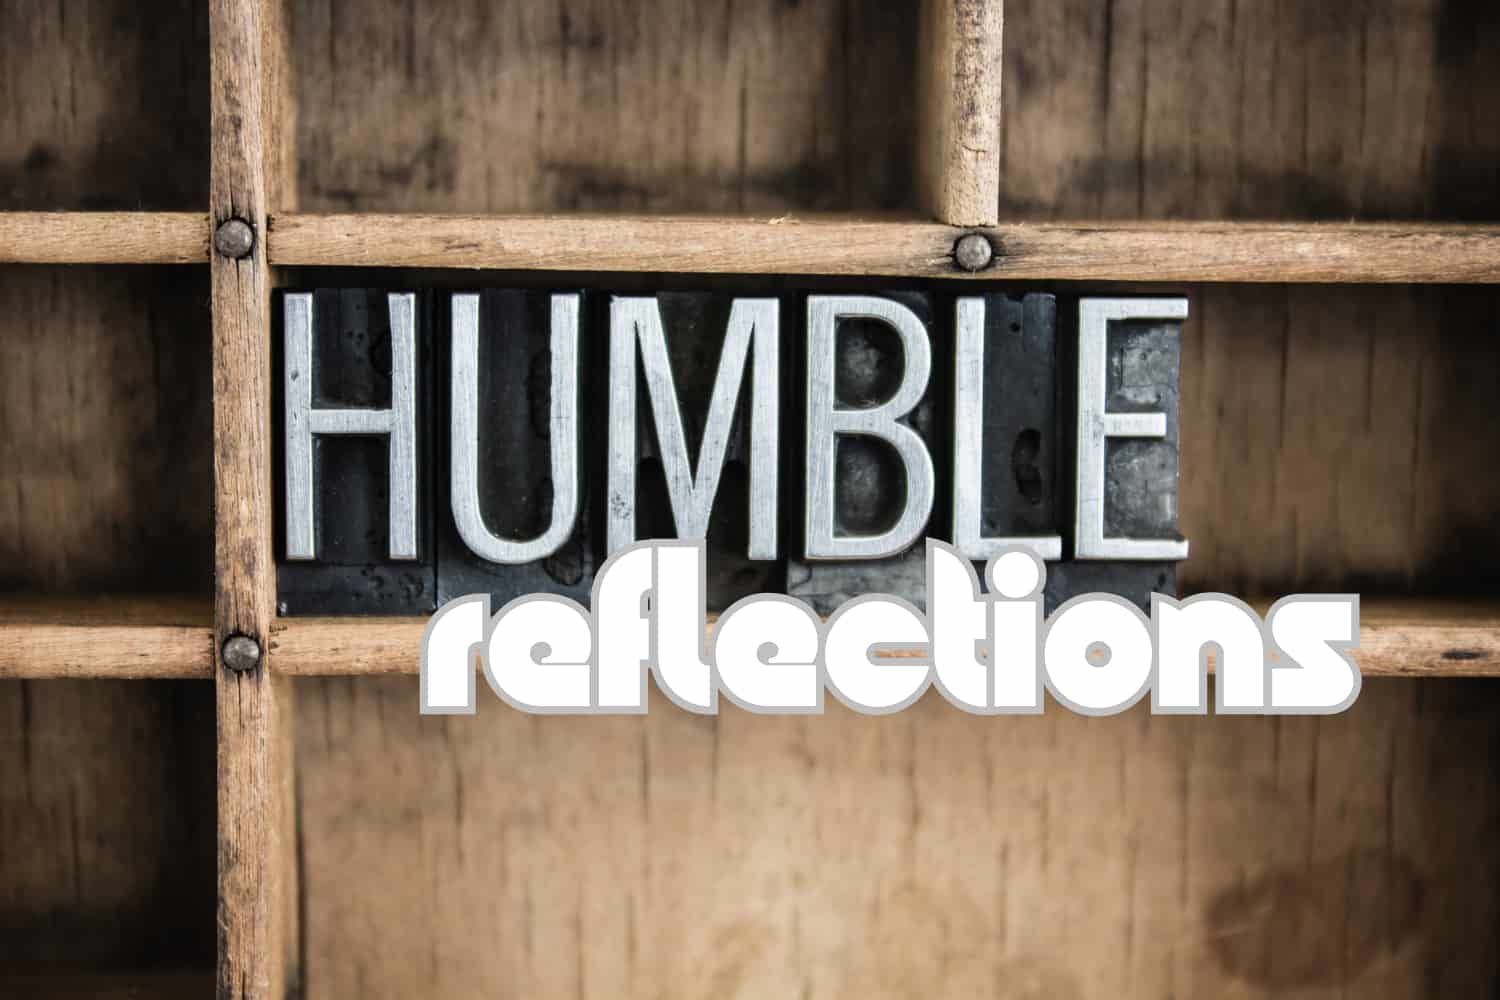 Object%20lesson%20-%20NT%20The%20pharisee%20and%20the%20tax%20collector%20-%20Humble%20reflections-5792de36 Sin / sinful